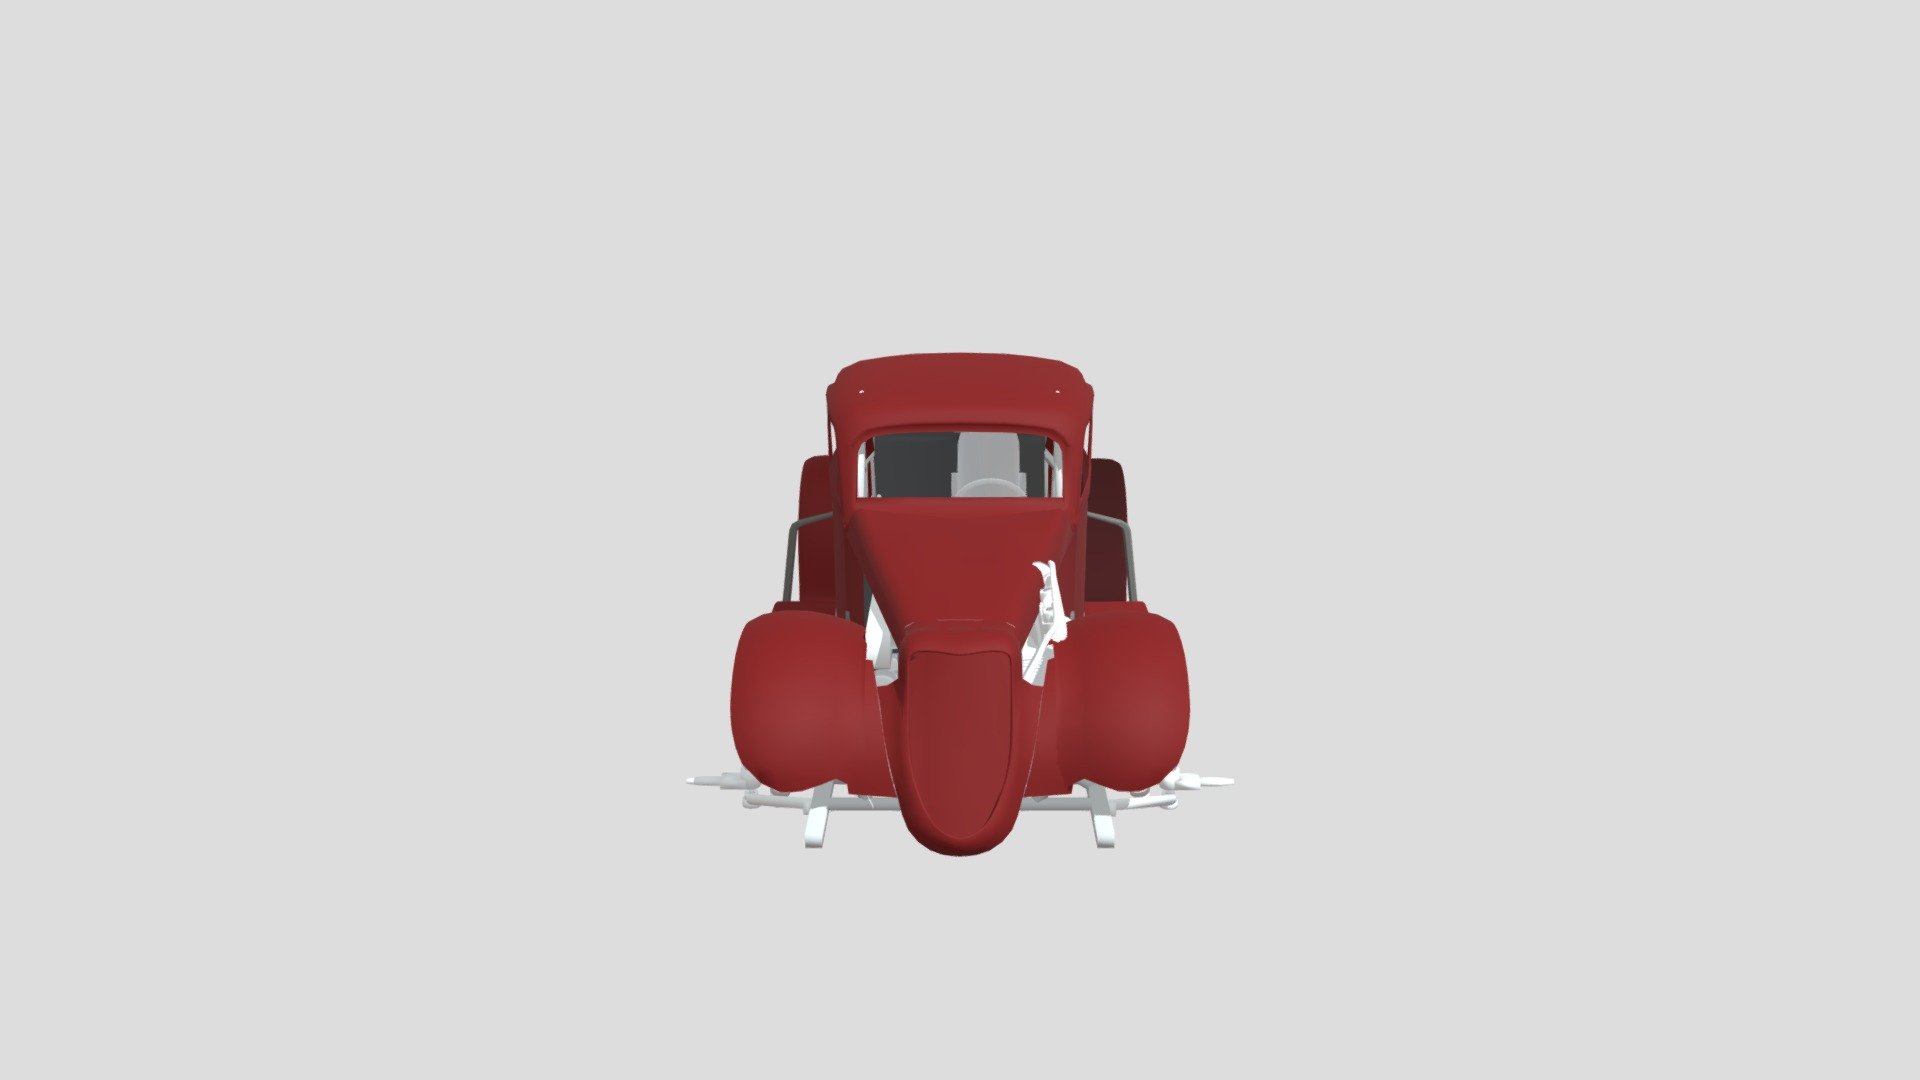 A fully modeled 34 ford coupe often found racing at small oval tracks and occasionally road courses. Model is very detailed in several areas of the car 3d model